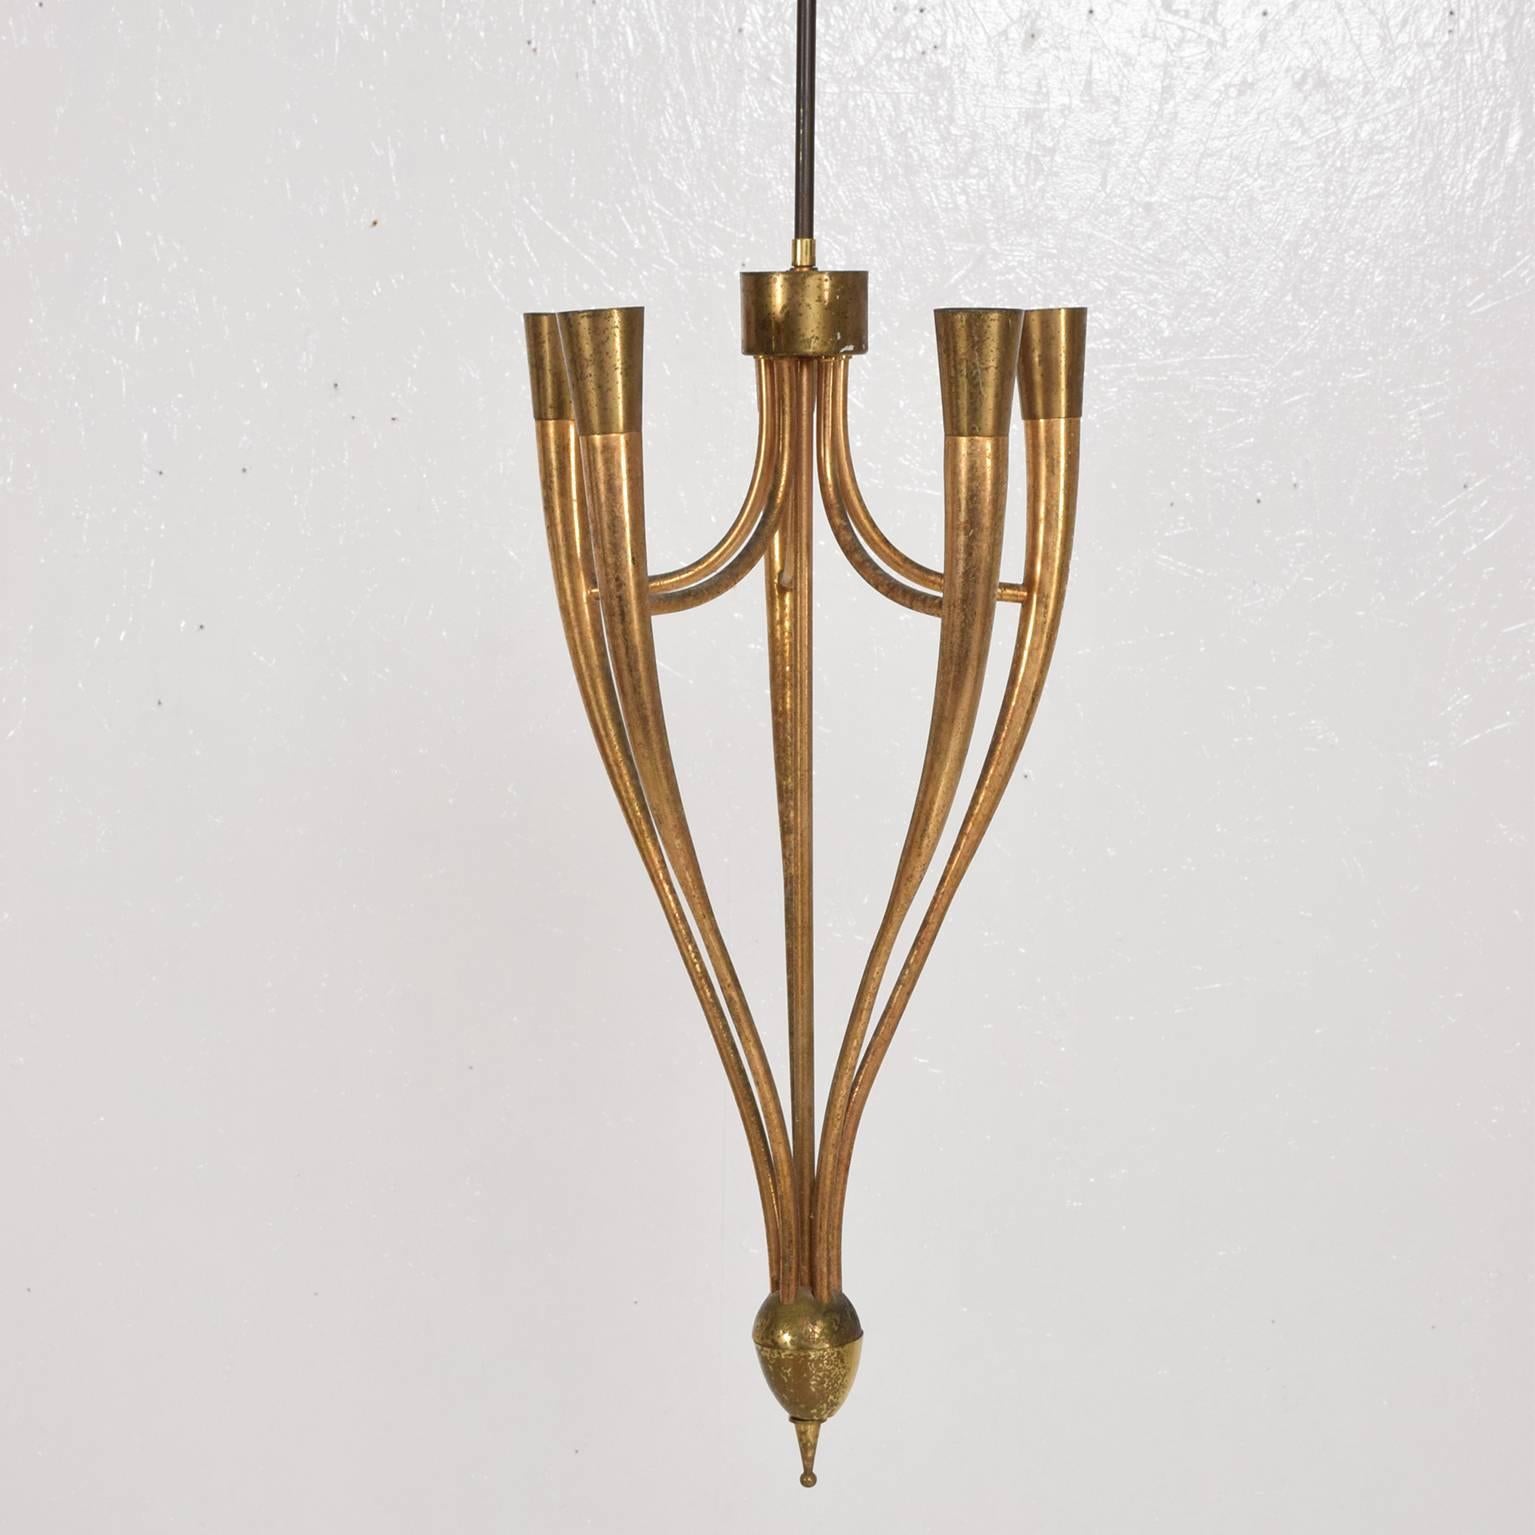 We are please to offer for your consideration a beautiful chandelier with five-light by Guglielmo Ulrich.

Two-tone sculptural brass body. 
Original patina. It can be polished and sealed upon request.
Retains original label. 
Dimensions: